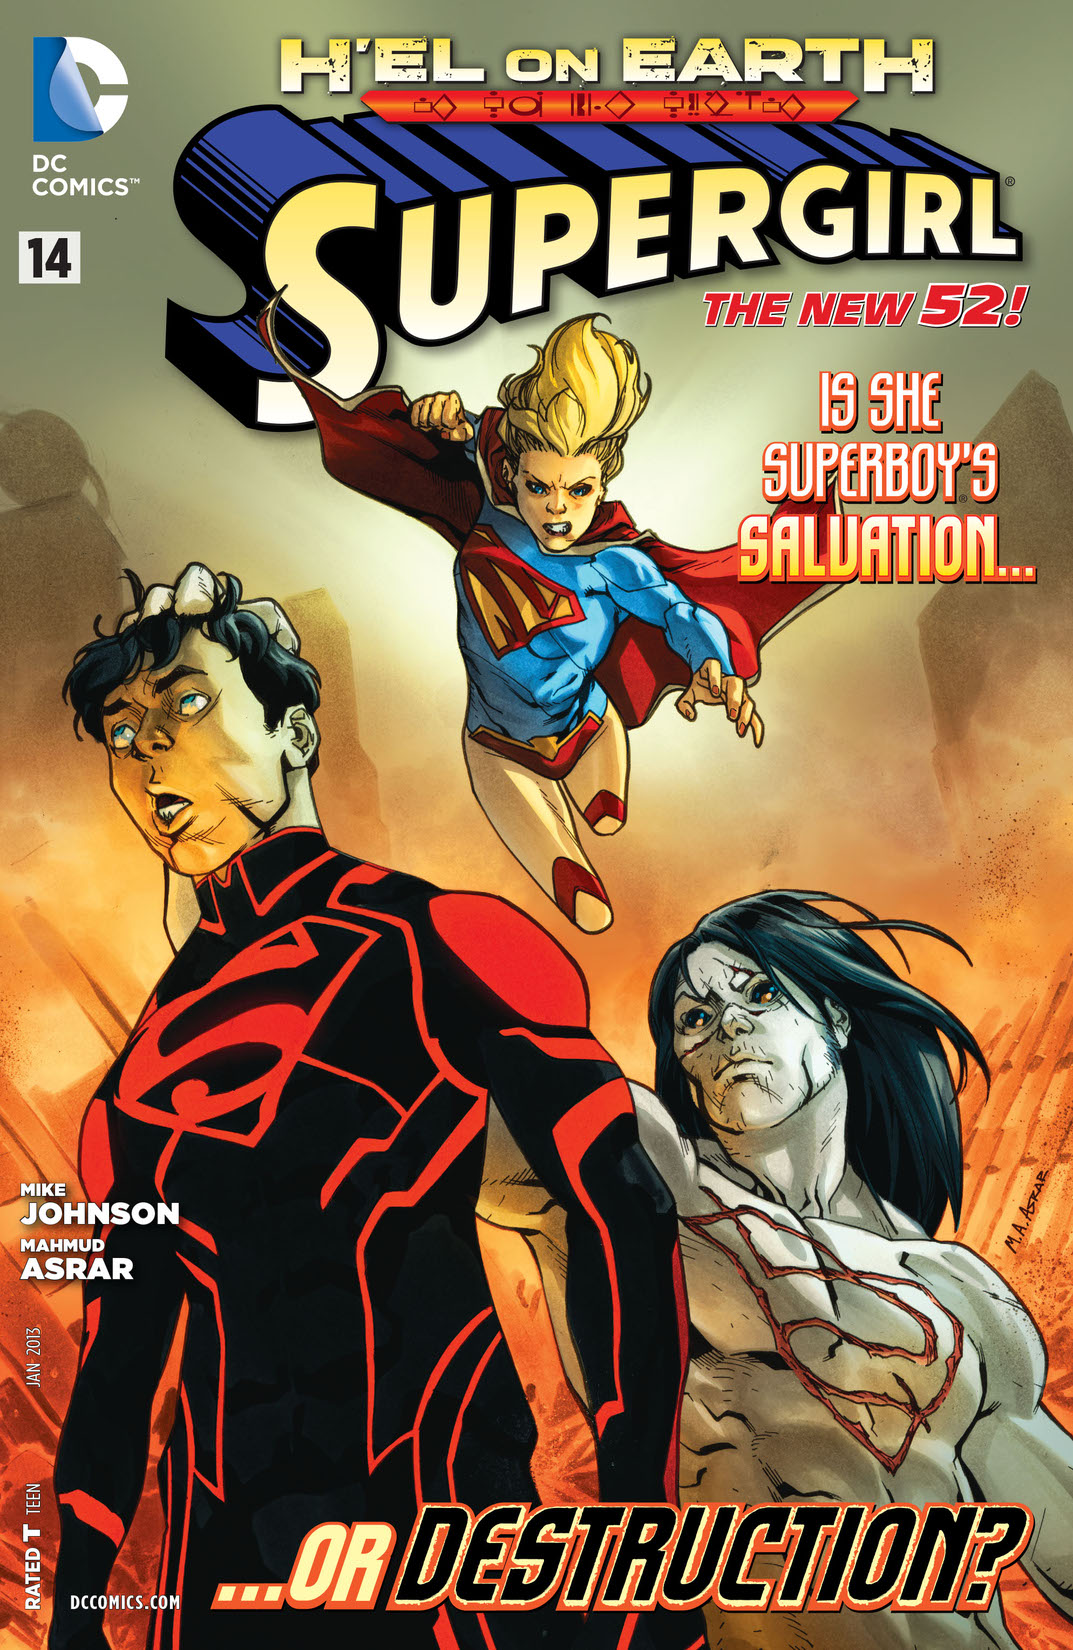 Supergirl (2011-) #14 preview images